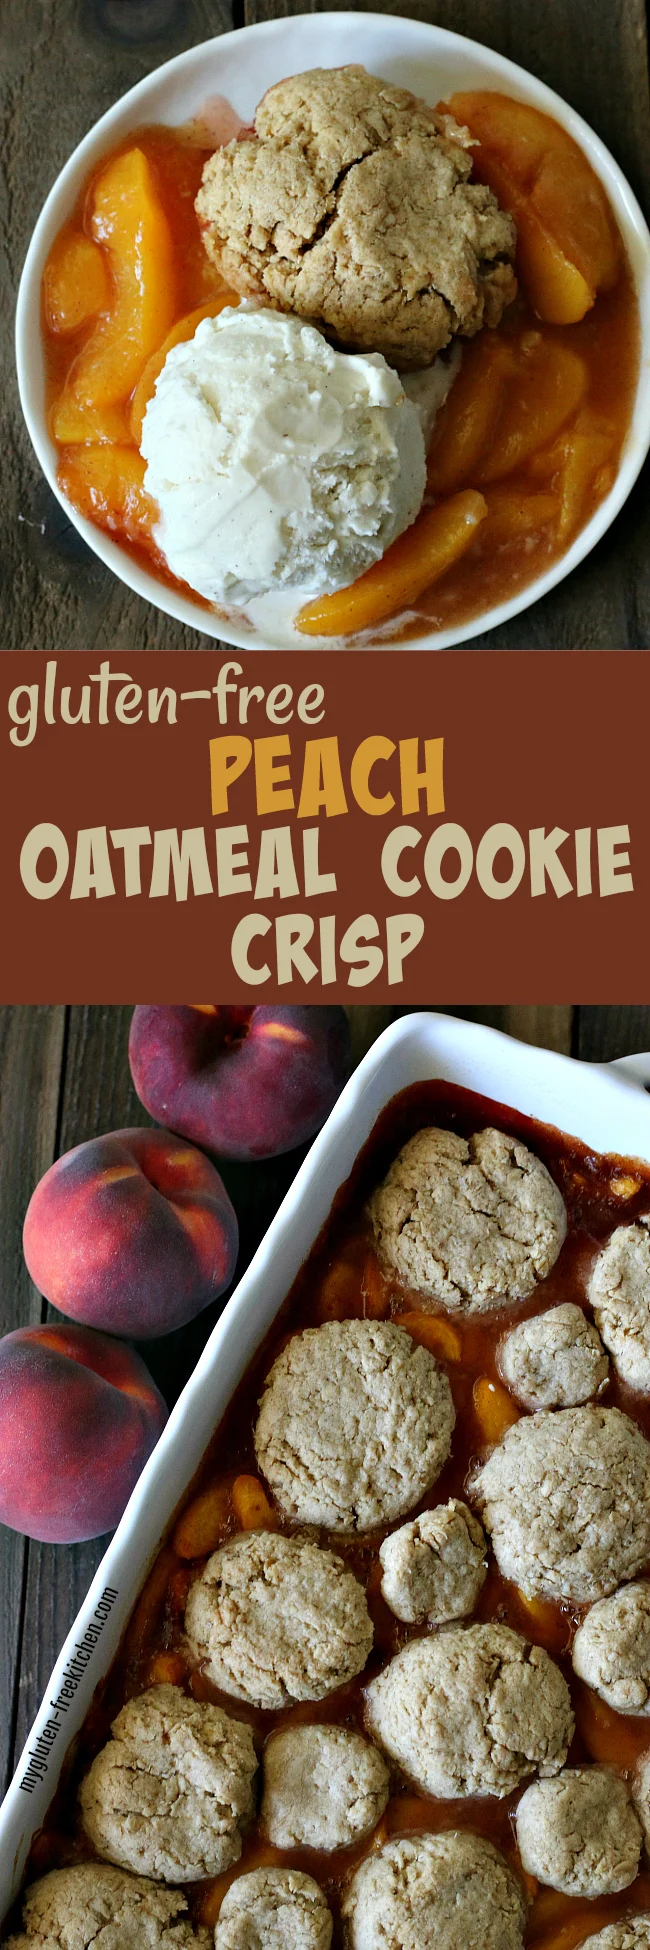 Gluten-free Peach Oatmeal Cookie Crisp Recipe with dairy-free option